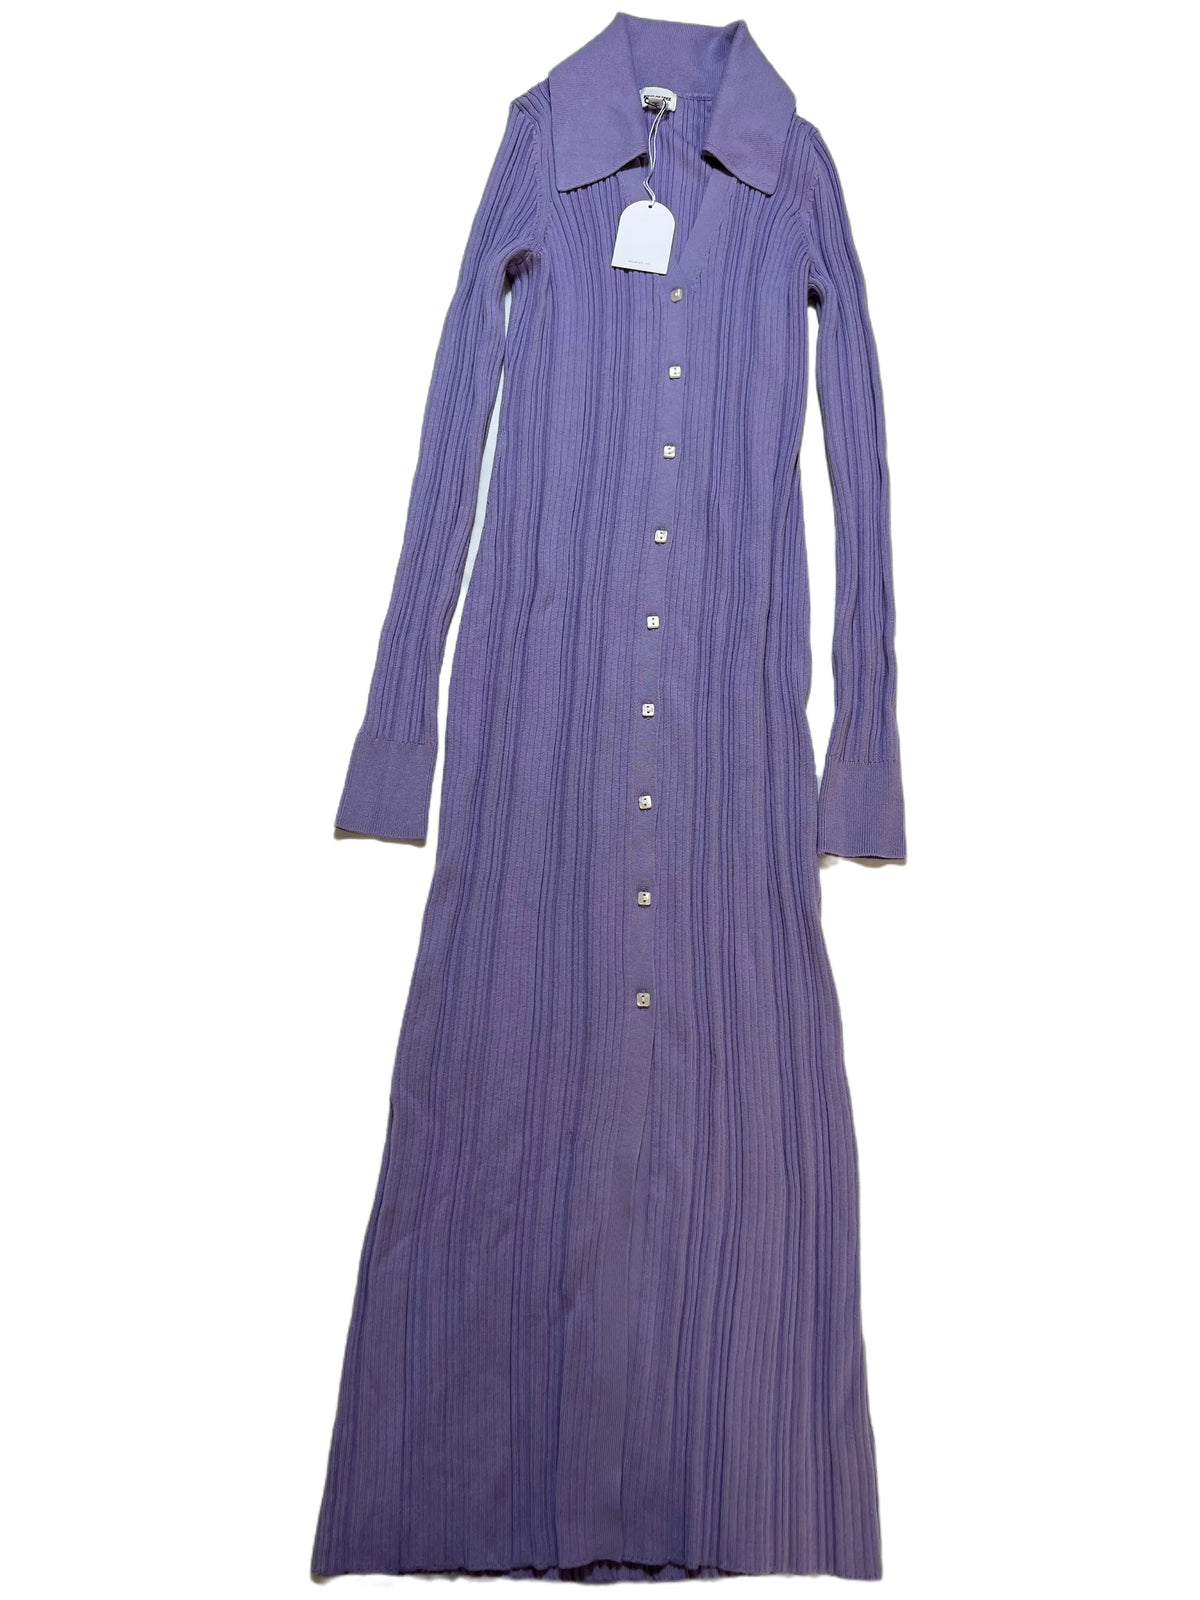 Song Of Style- Purple Long Sleeve Maxi Dress New With Tags!